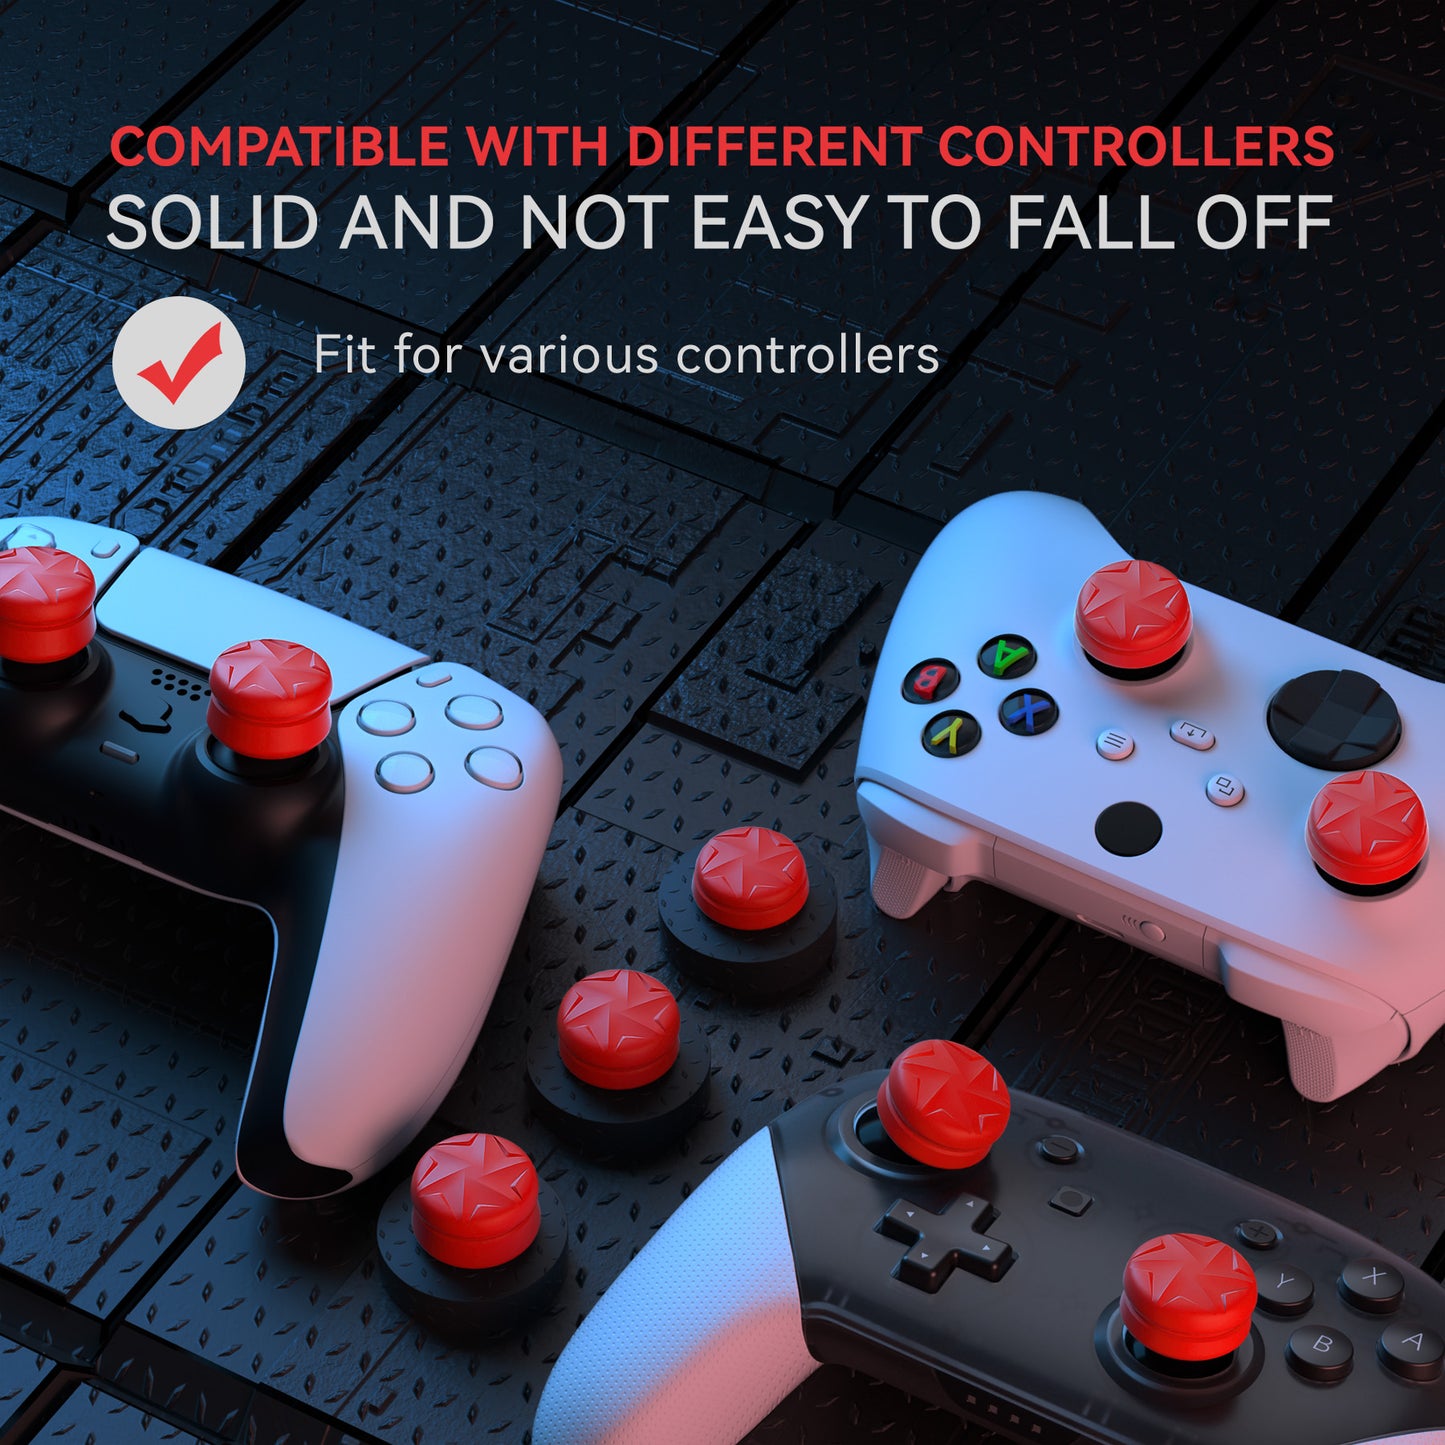 PlayVital 3 Height Razor Thumbs Cushion Caps Thumb Grips for ps5, for ps4, Thumbstick Grip Cover for Xbox Core Wireless Controller, Thumb Grip Caps for Xbox One, Elite Series 2, for Switch Pro - Passion Red - PJM3061 PlayVital